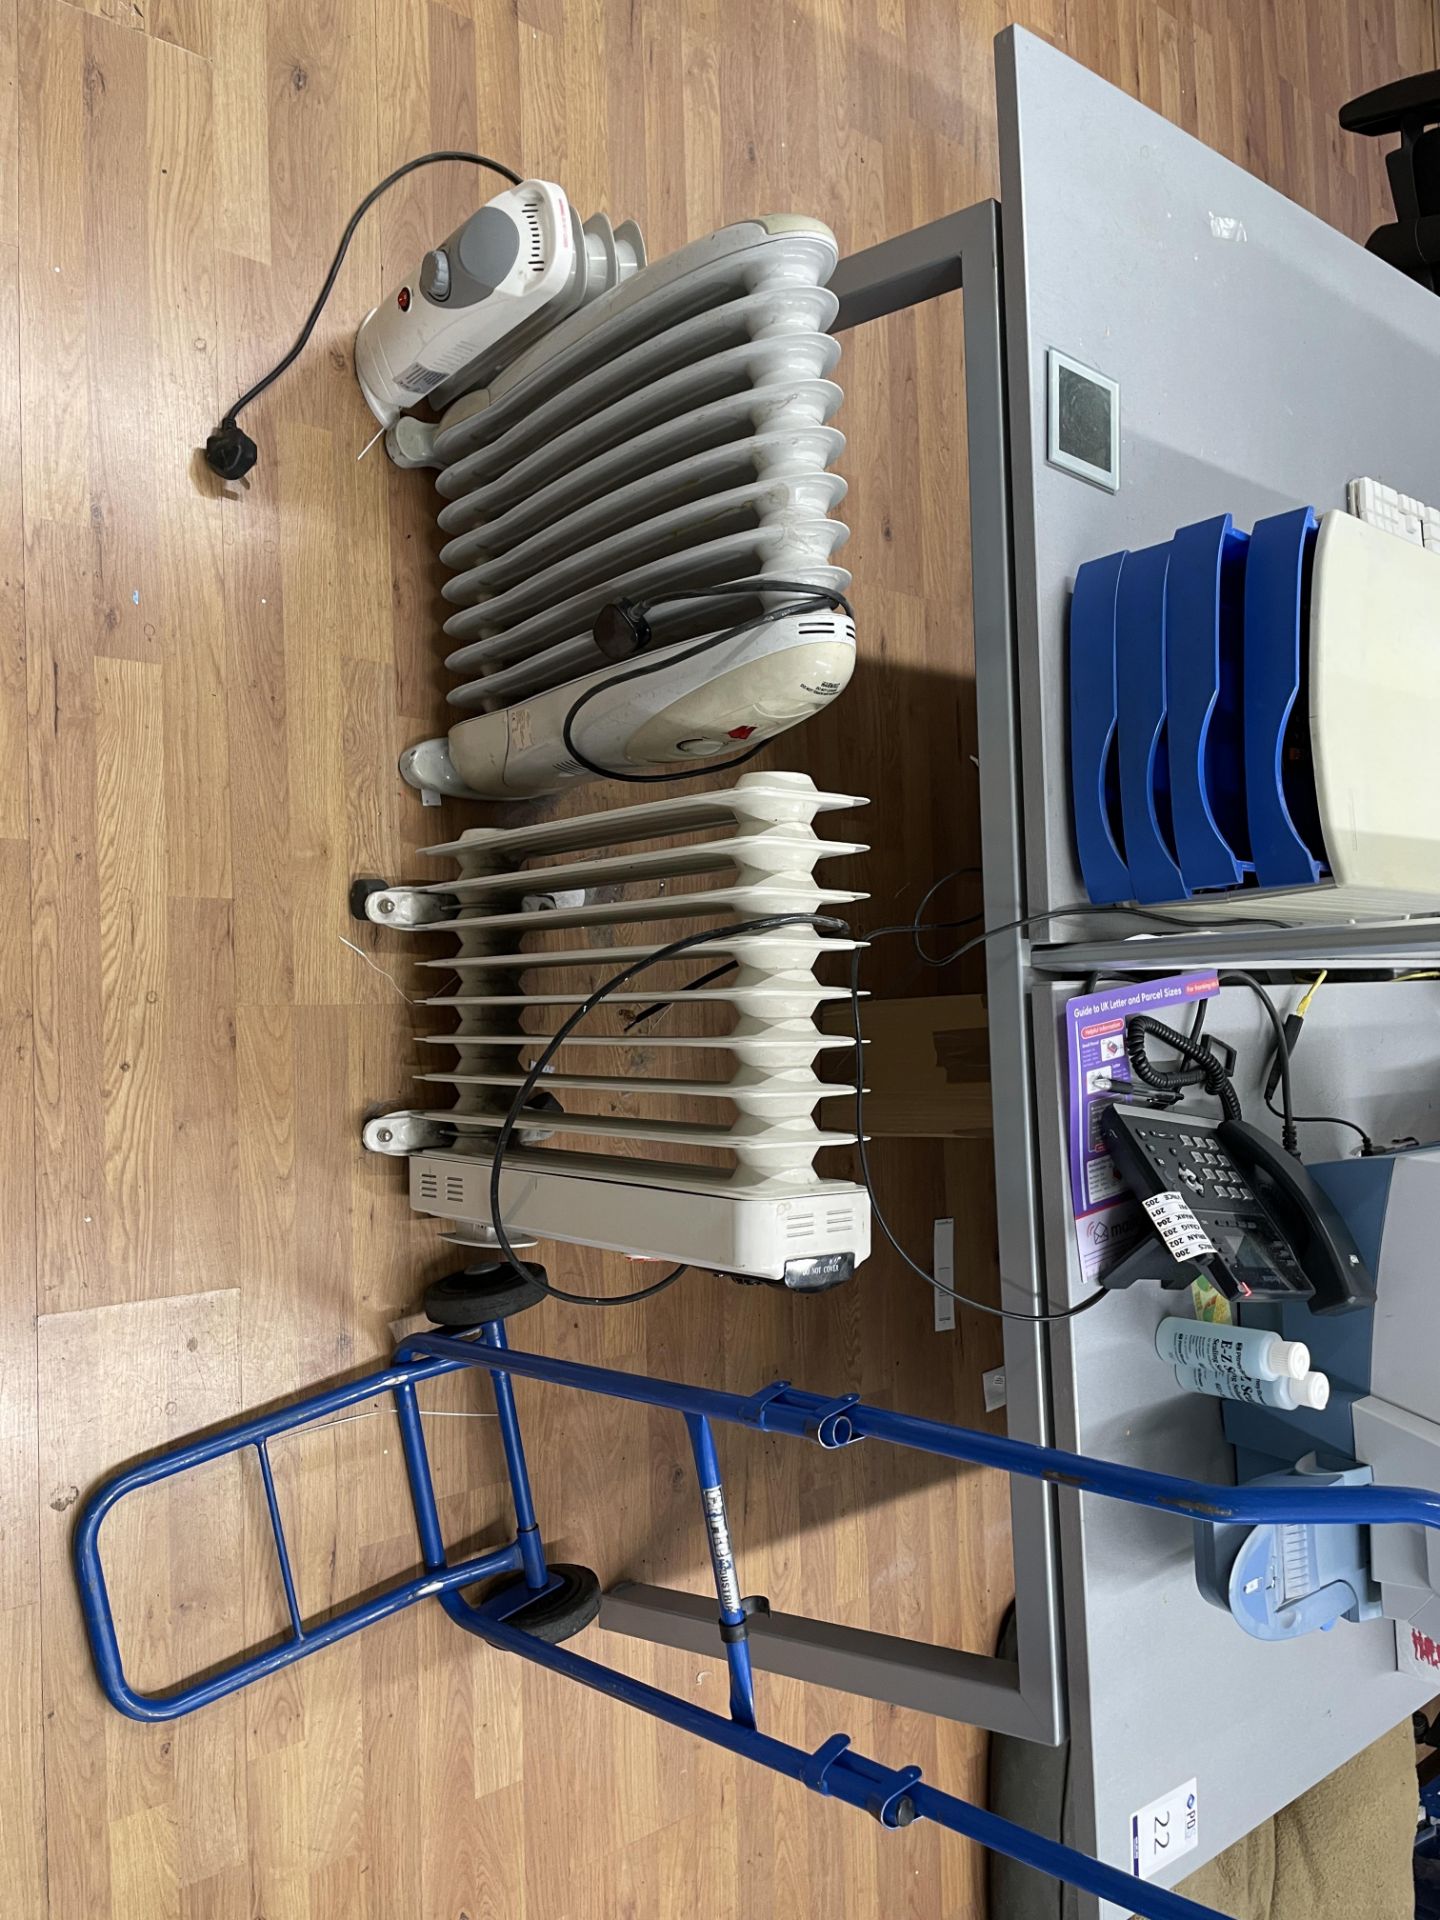 Sack Truck, 2 Radiators, Waste Bins & Miscellaneous Items (Location: Finchley. Please Refer to